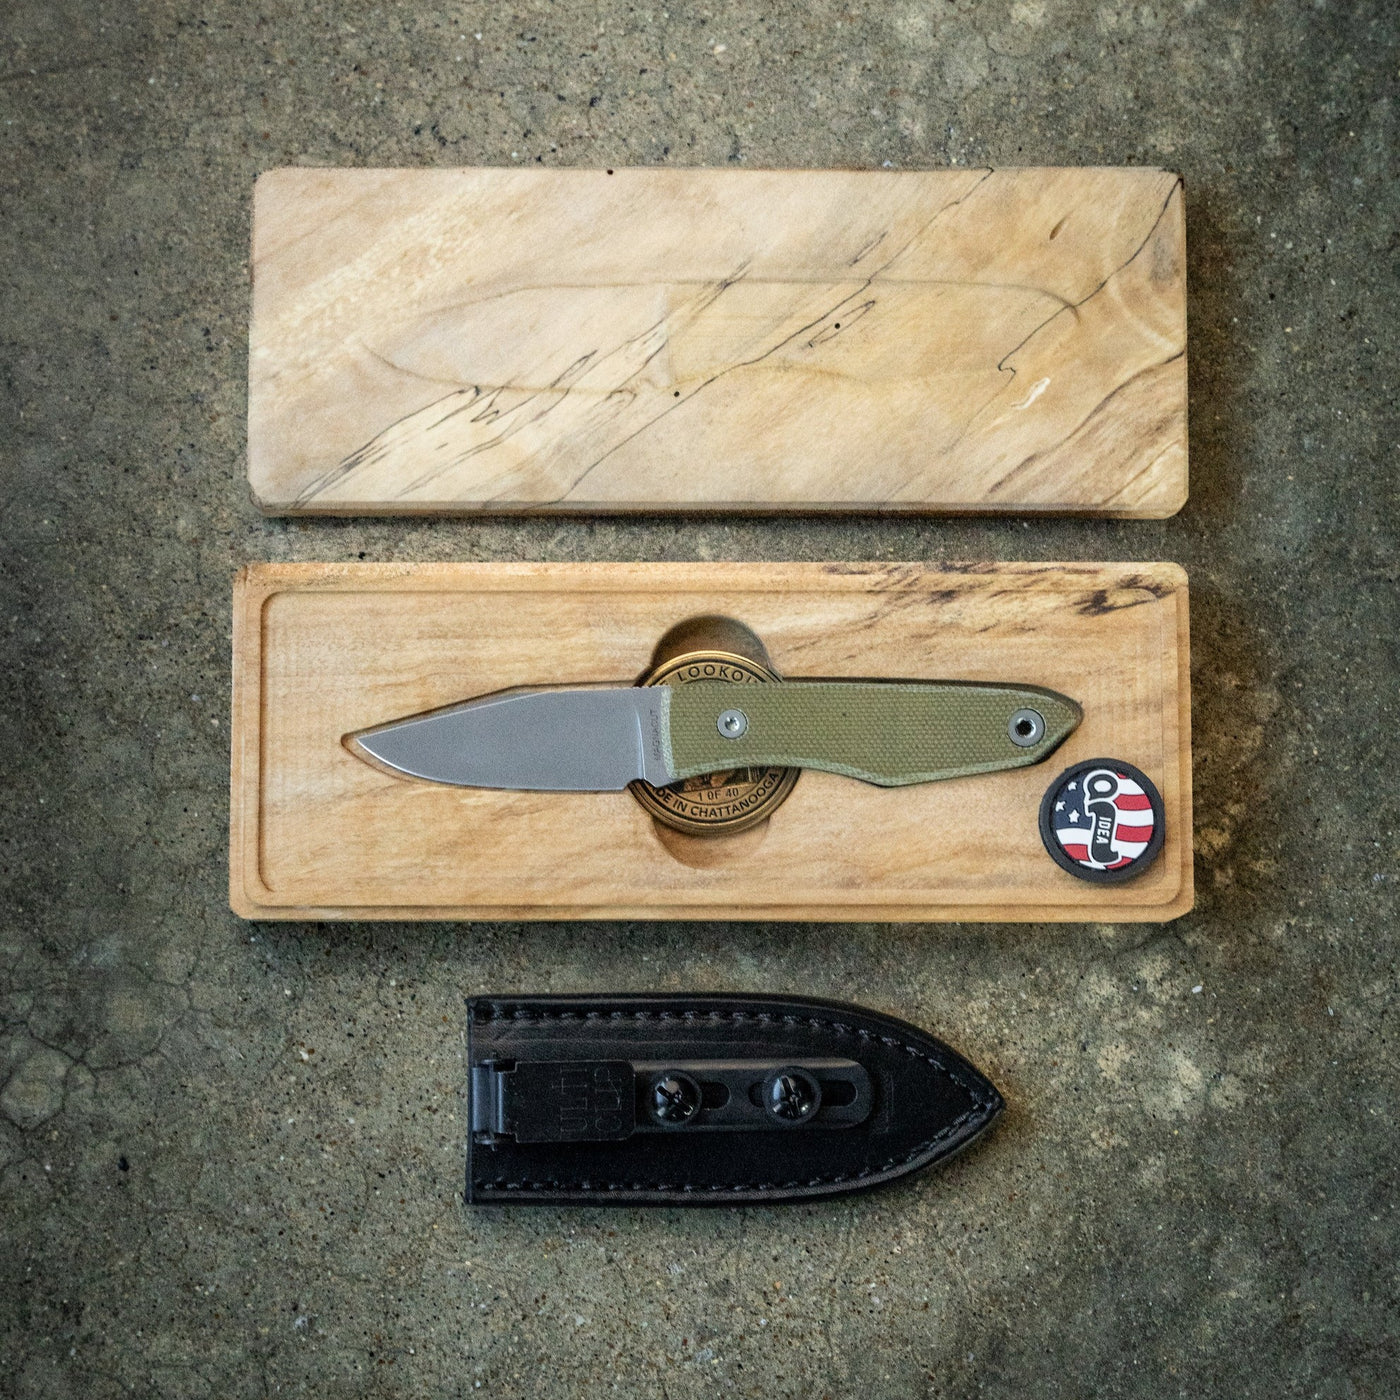 The lookout fixed blade knife